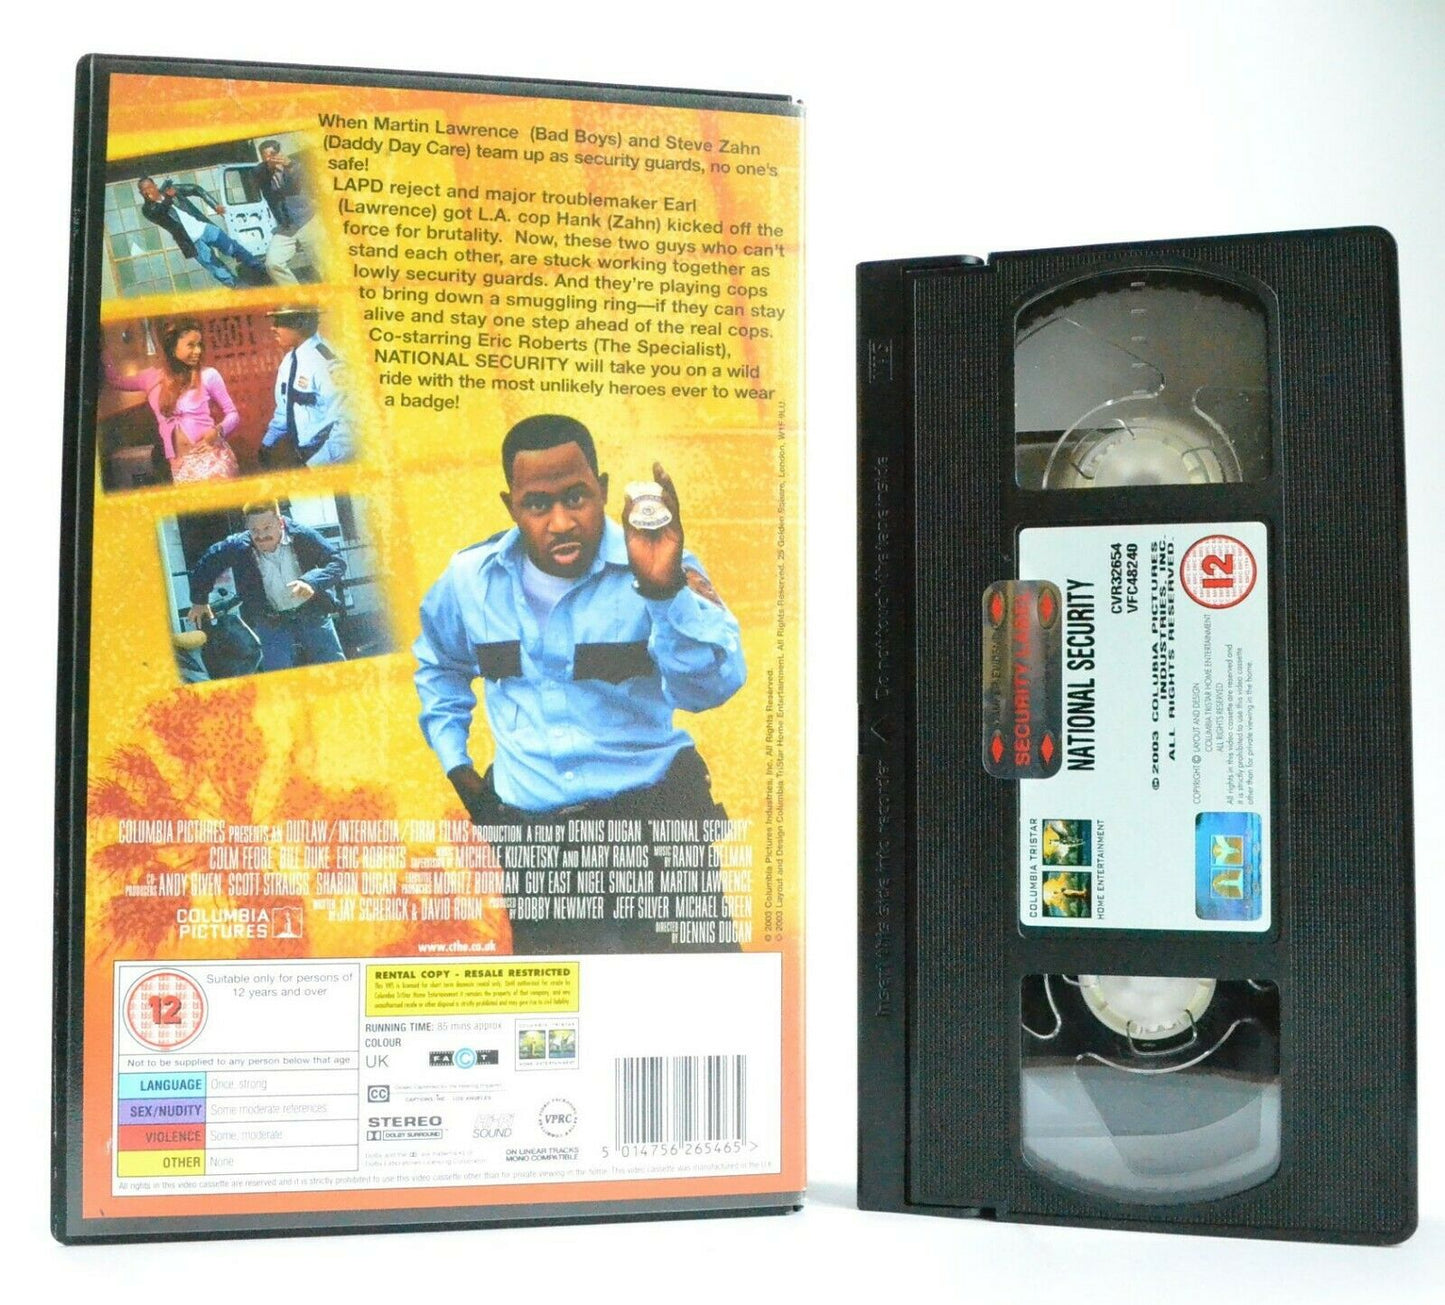 National Security: Action Comedy (2003) - Large Box - Martin Lawrence - Pal VHS-